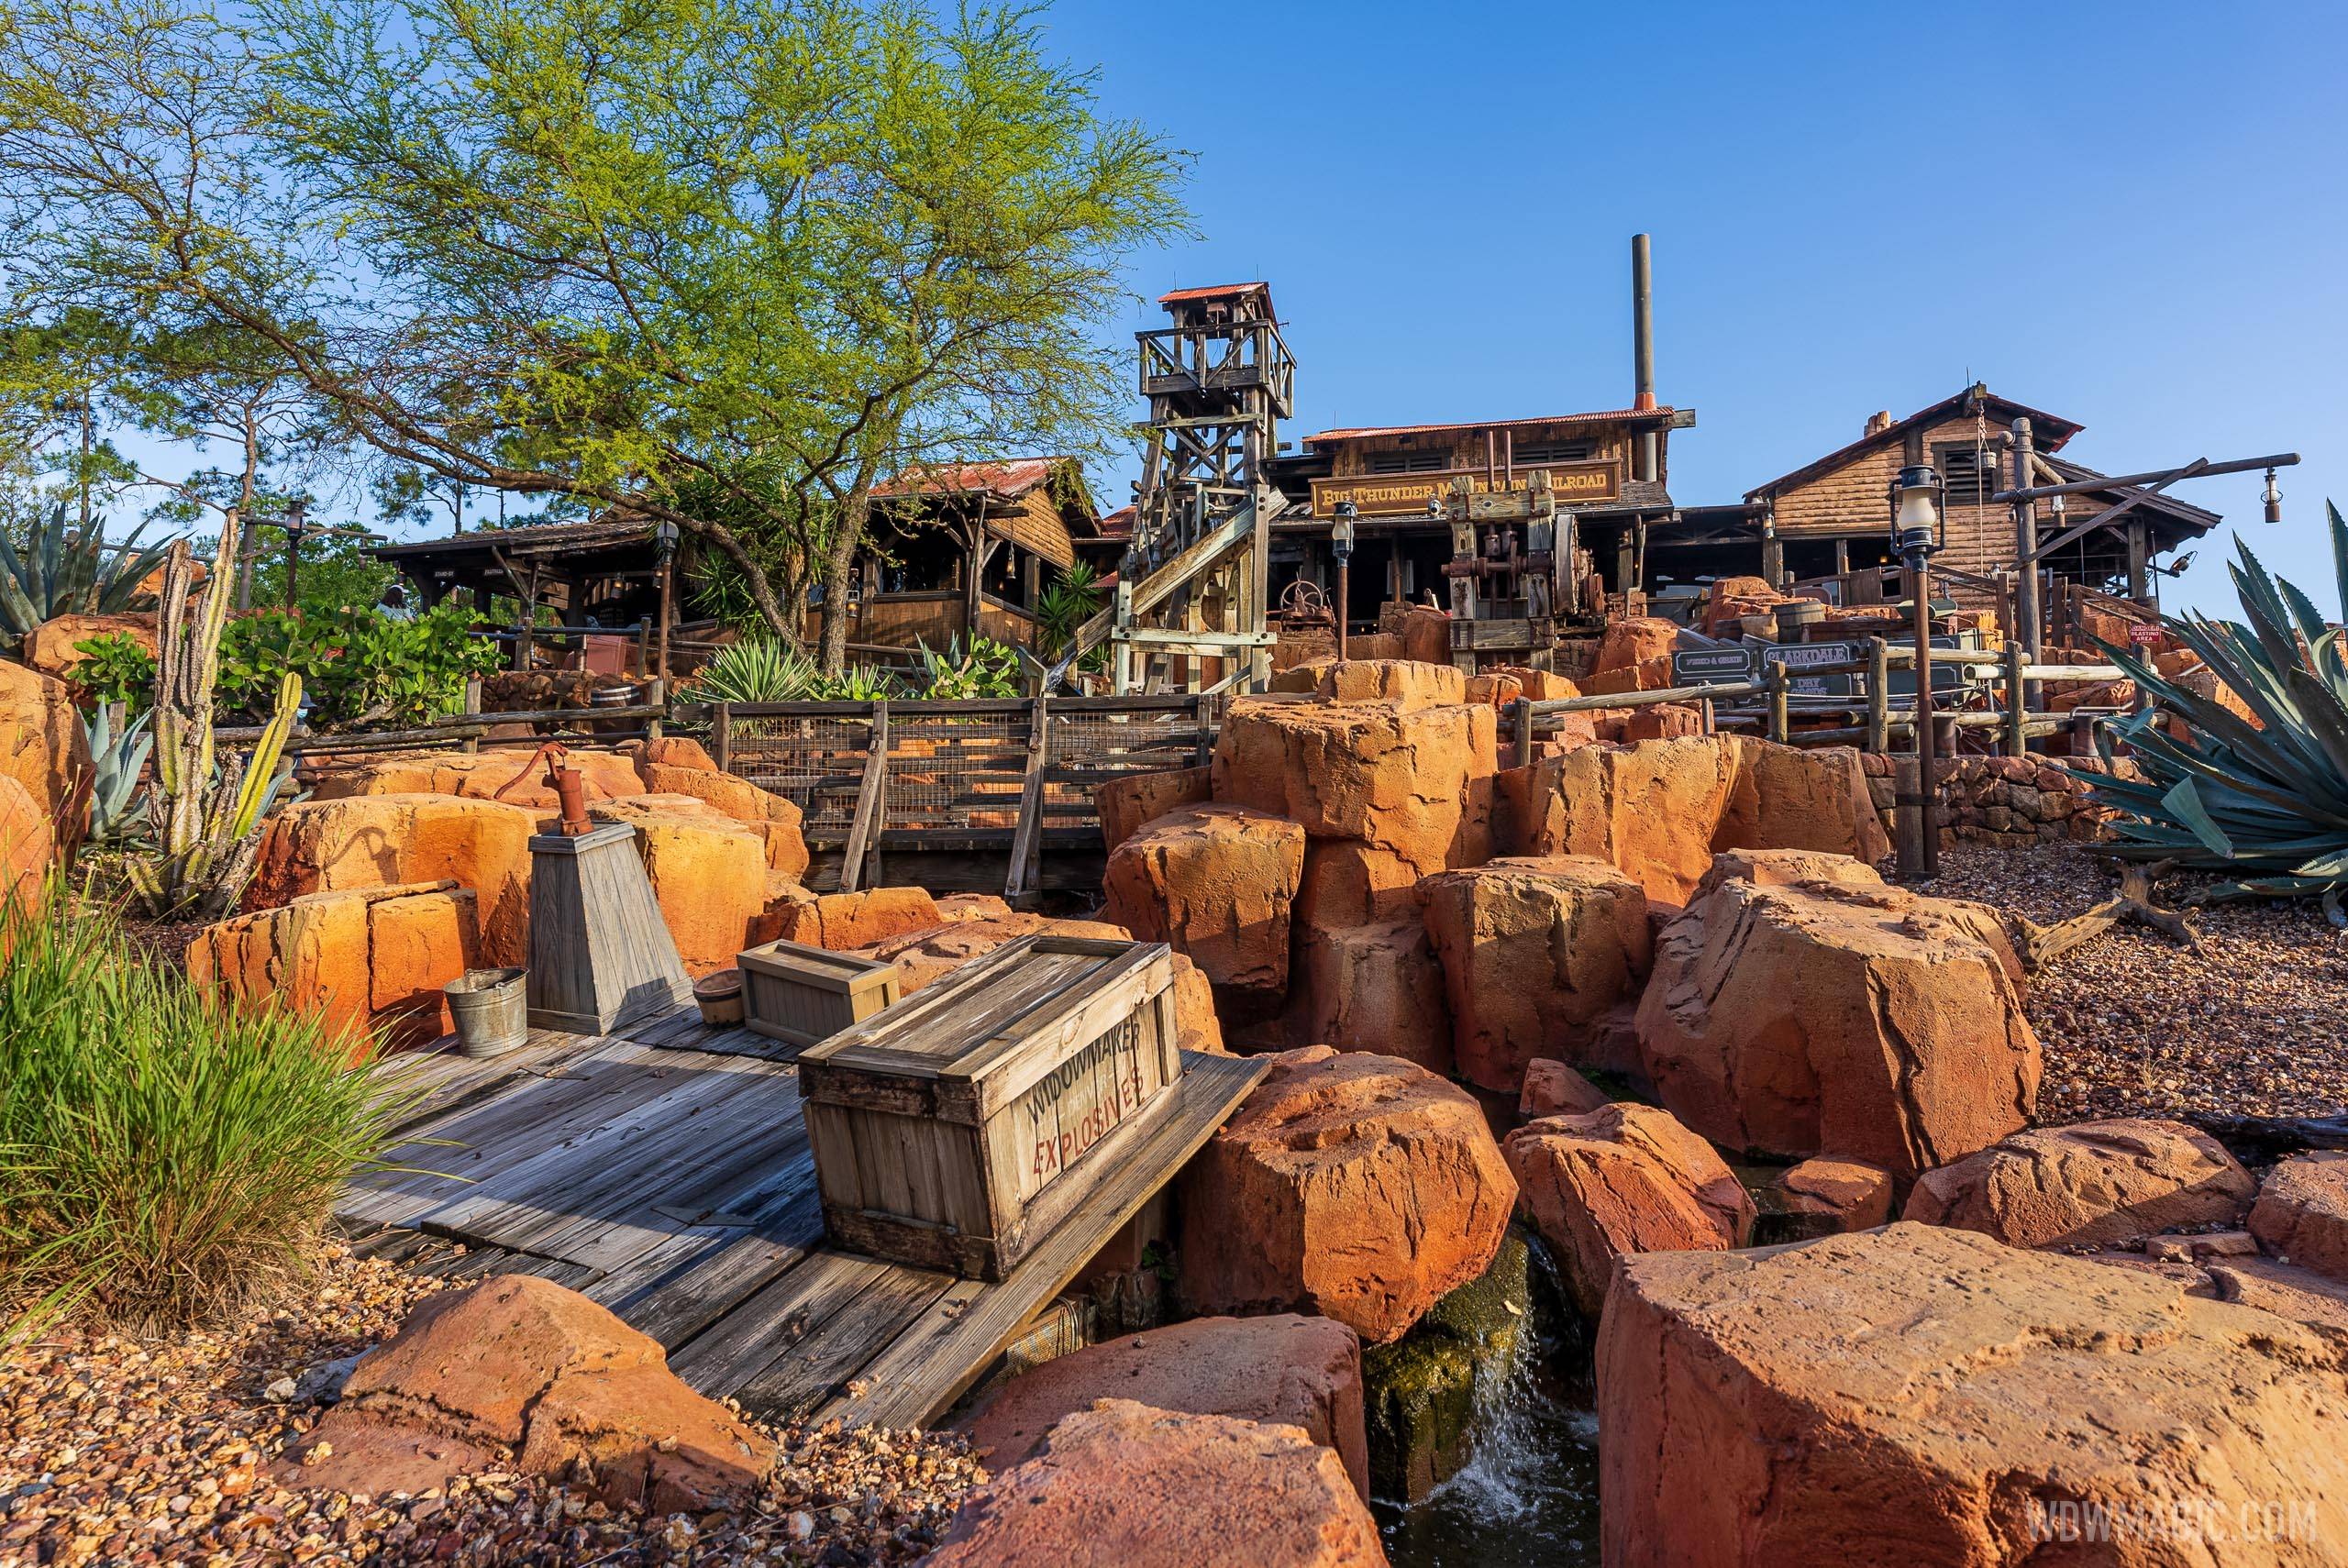 Big Thunder Mountain will be operating during Extended Evening Hours at Magic Kingdom